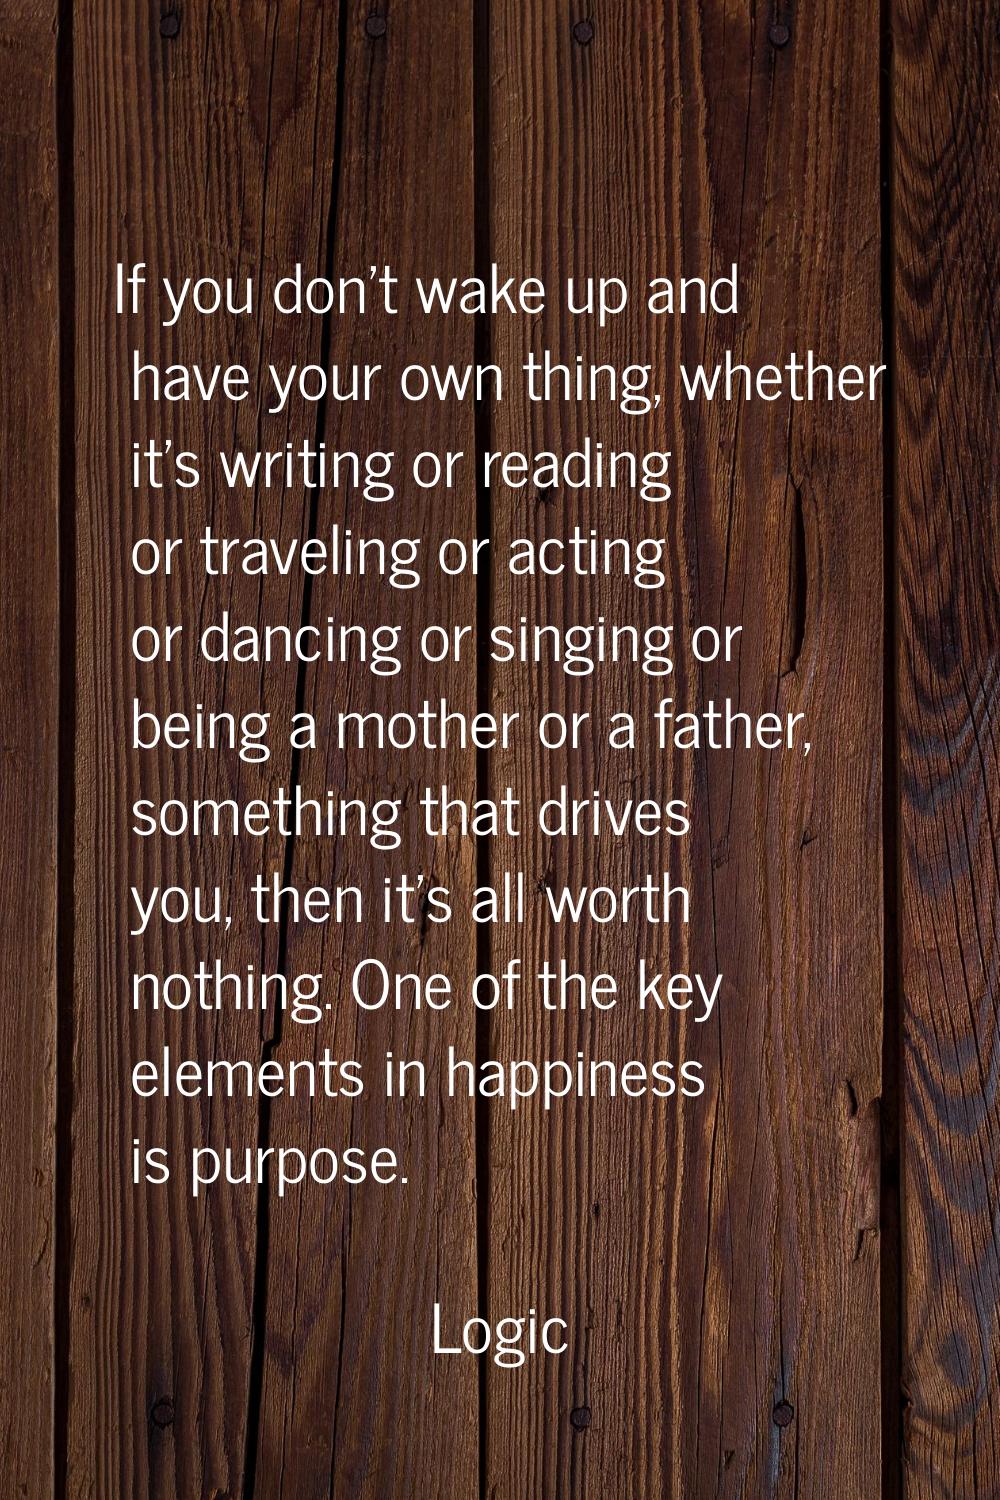 If you don't wake up and have your own thing, whether it's writing or reading or traveling or actin